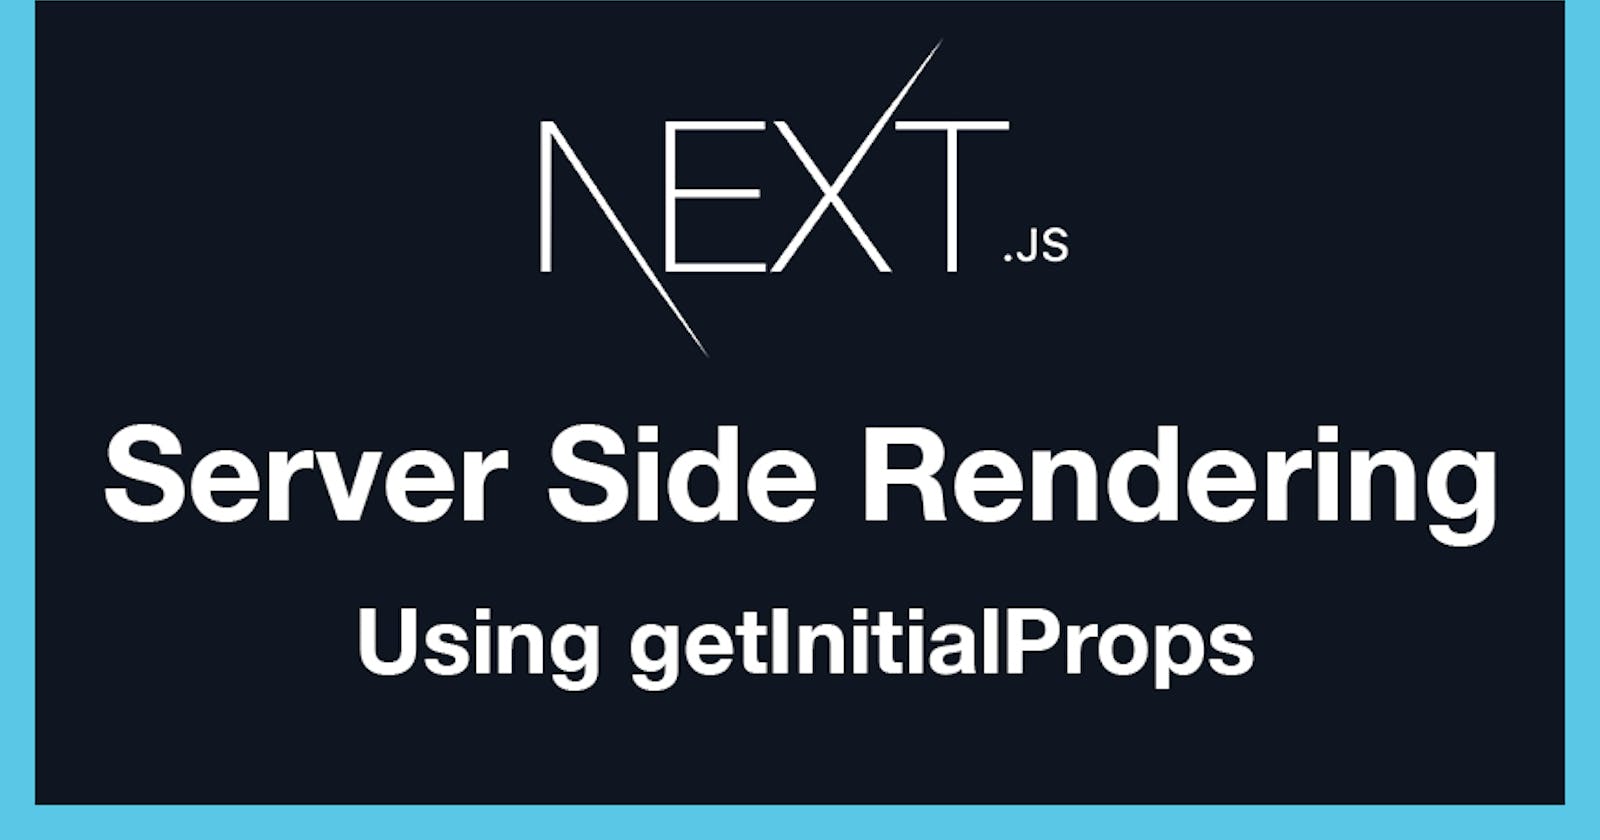 Next.js Server Side Rendering and getInitialProps